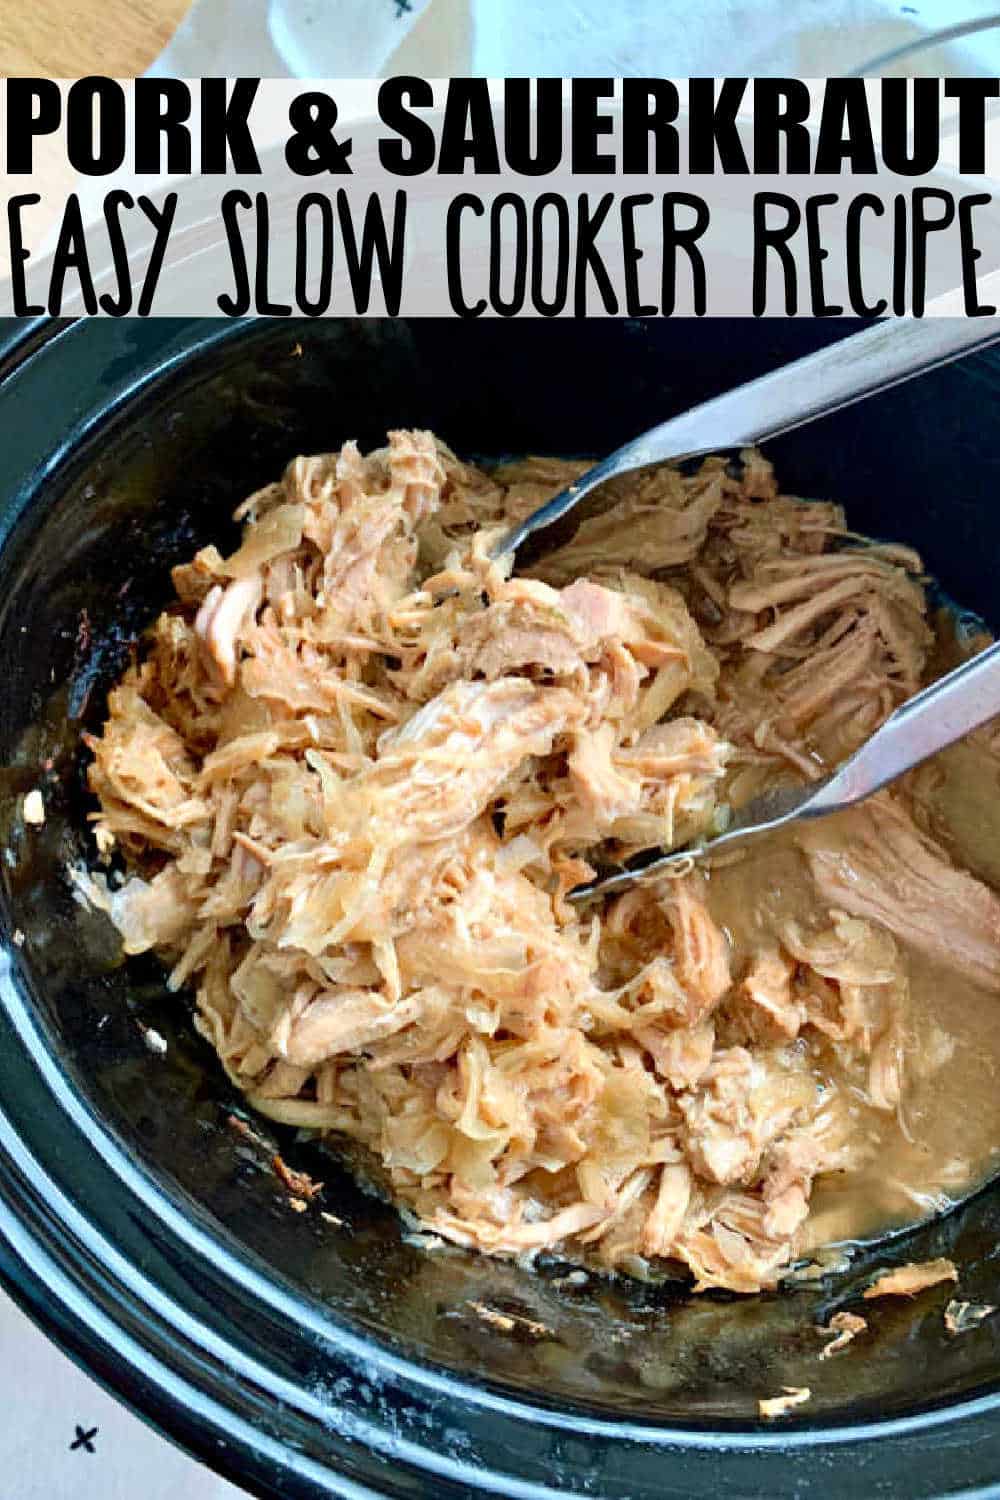 Fix this Slow Cooker Pork and Sauerkraut on New Year's Day to ensure good luck in the coming year. As a pig roots forward, so will you! via @foodtasticmom